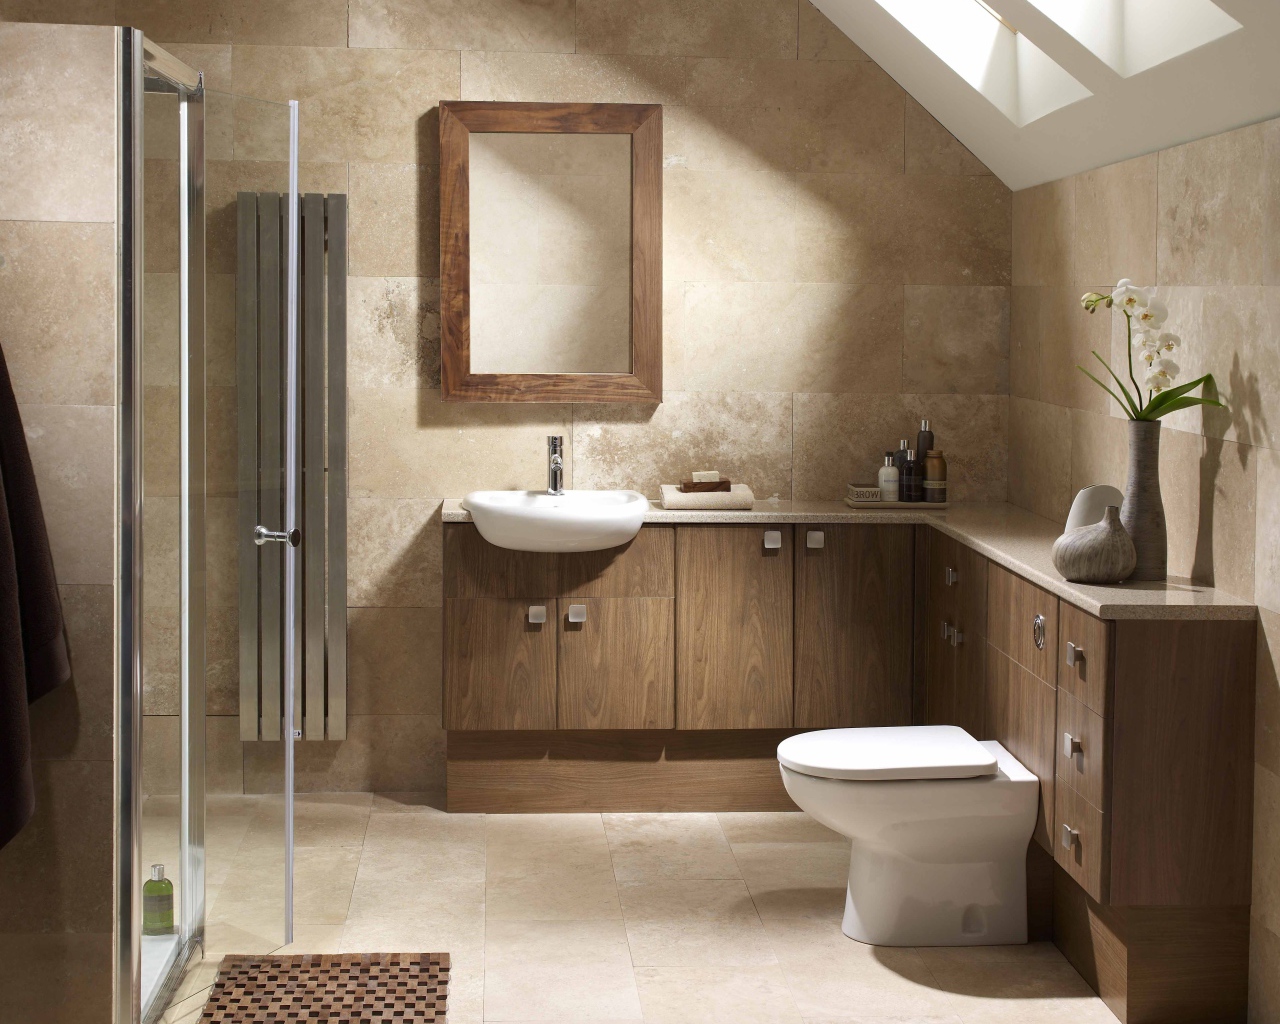 Minimalism in the design of the bathroom